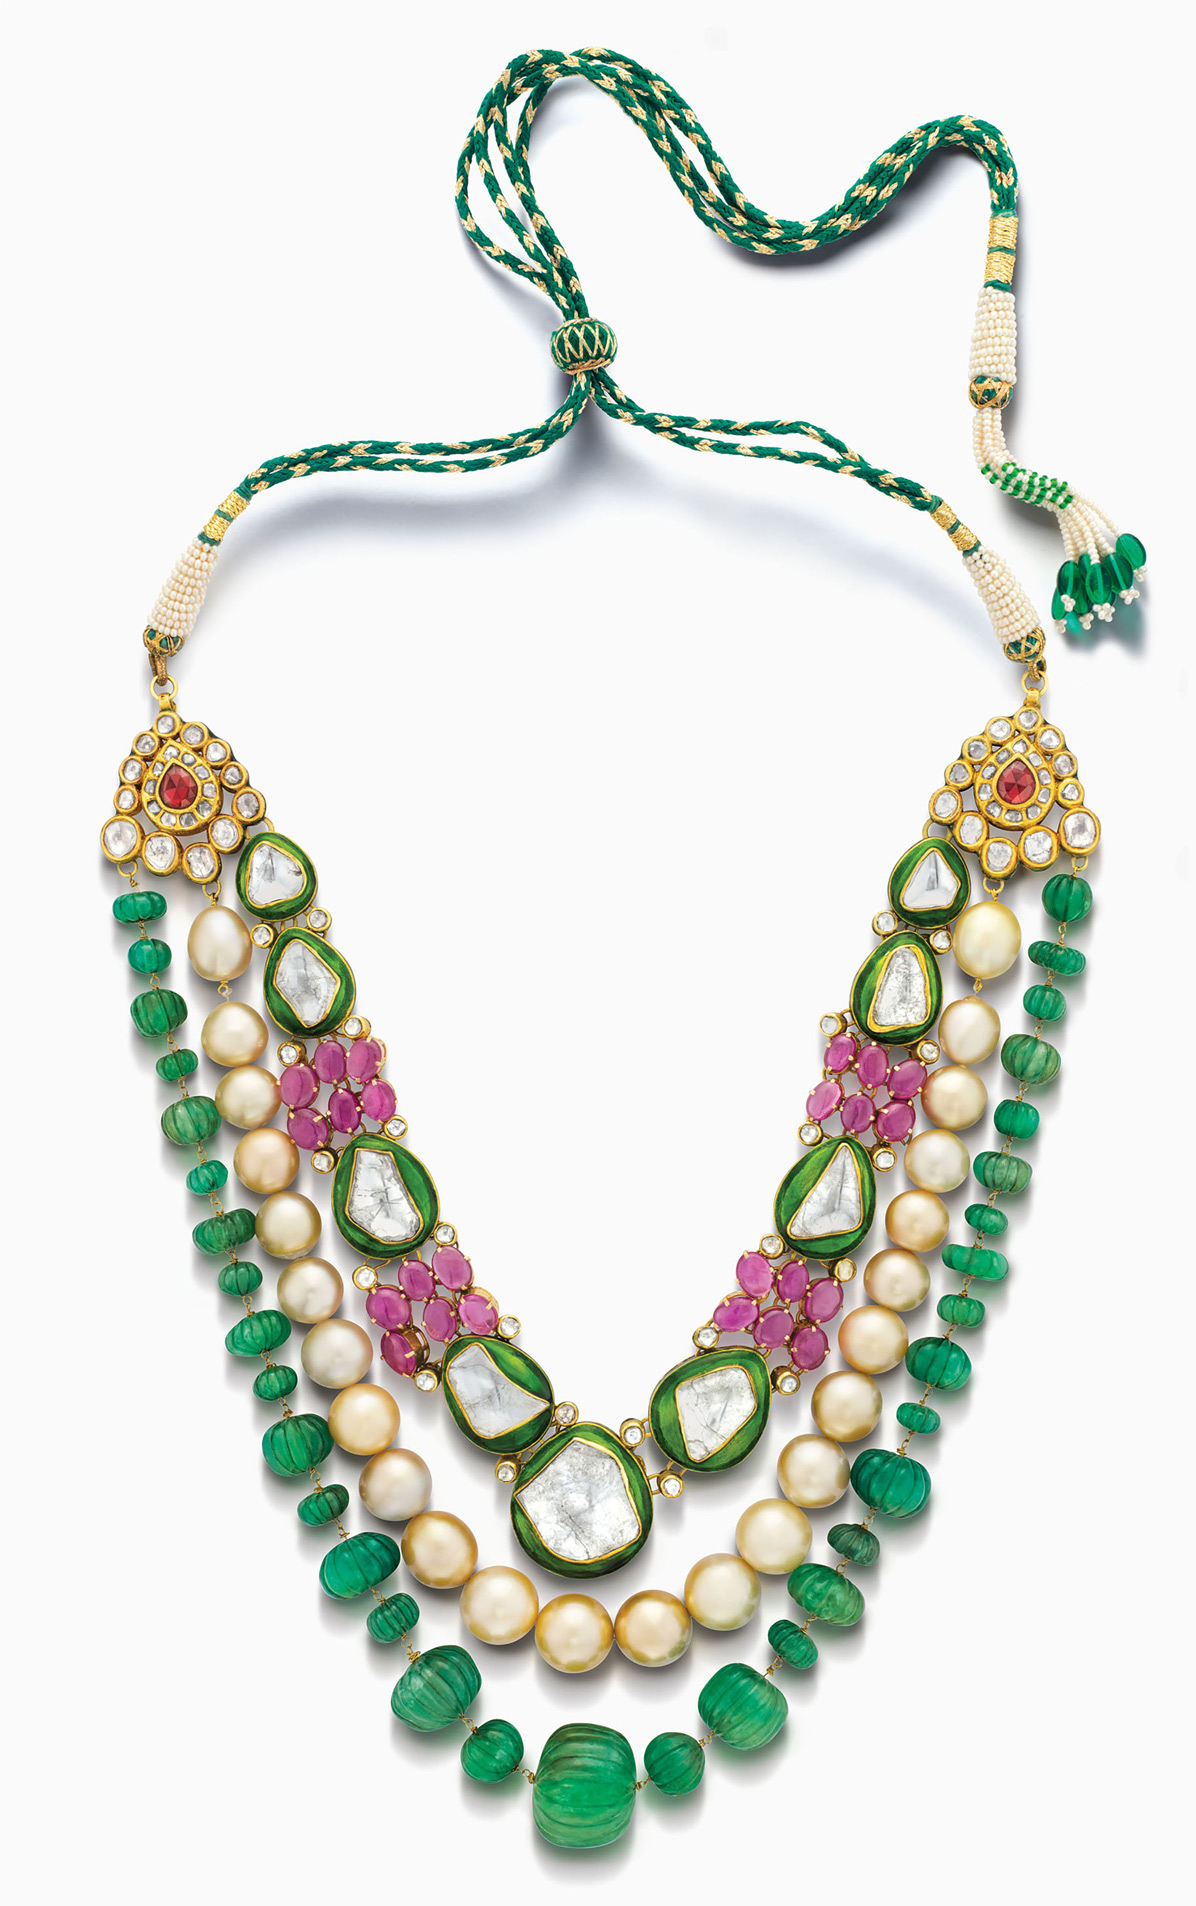 House of Rose necklace with polki diamonds, emeralds, pearls and pink sapphires